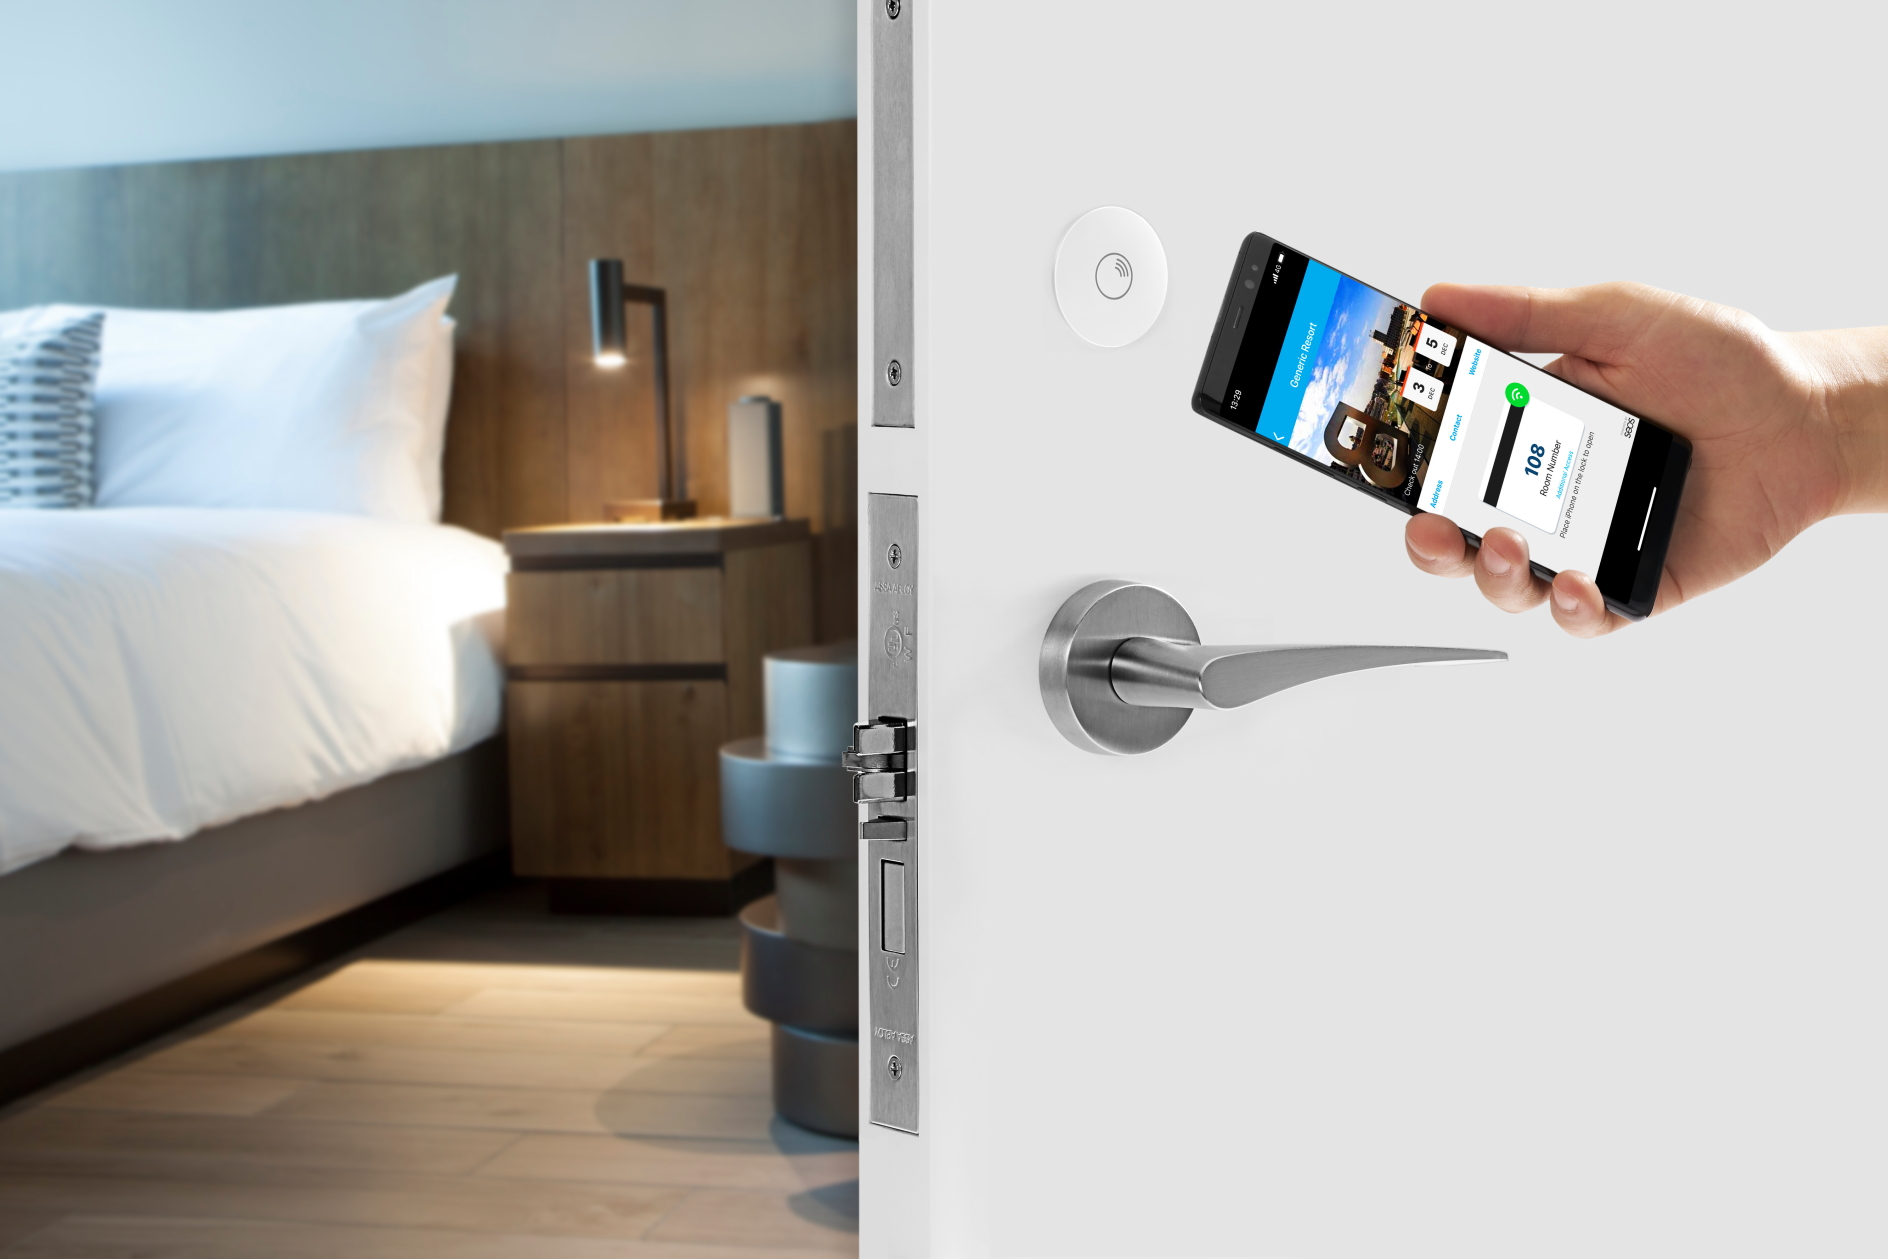 Sofitel Sydney Darling Harbour has upgraded its door locks and installed self check-in kiosks. Click to enlarge.